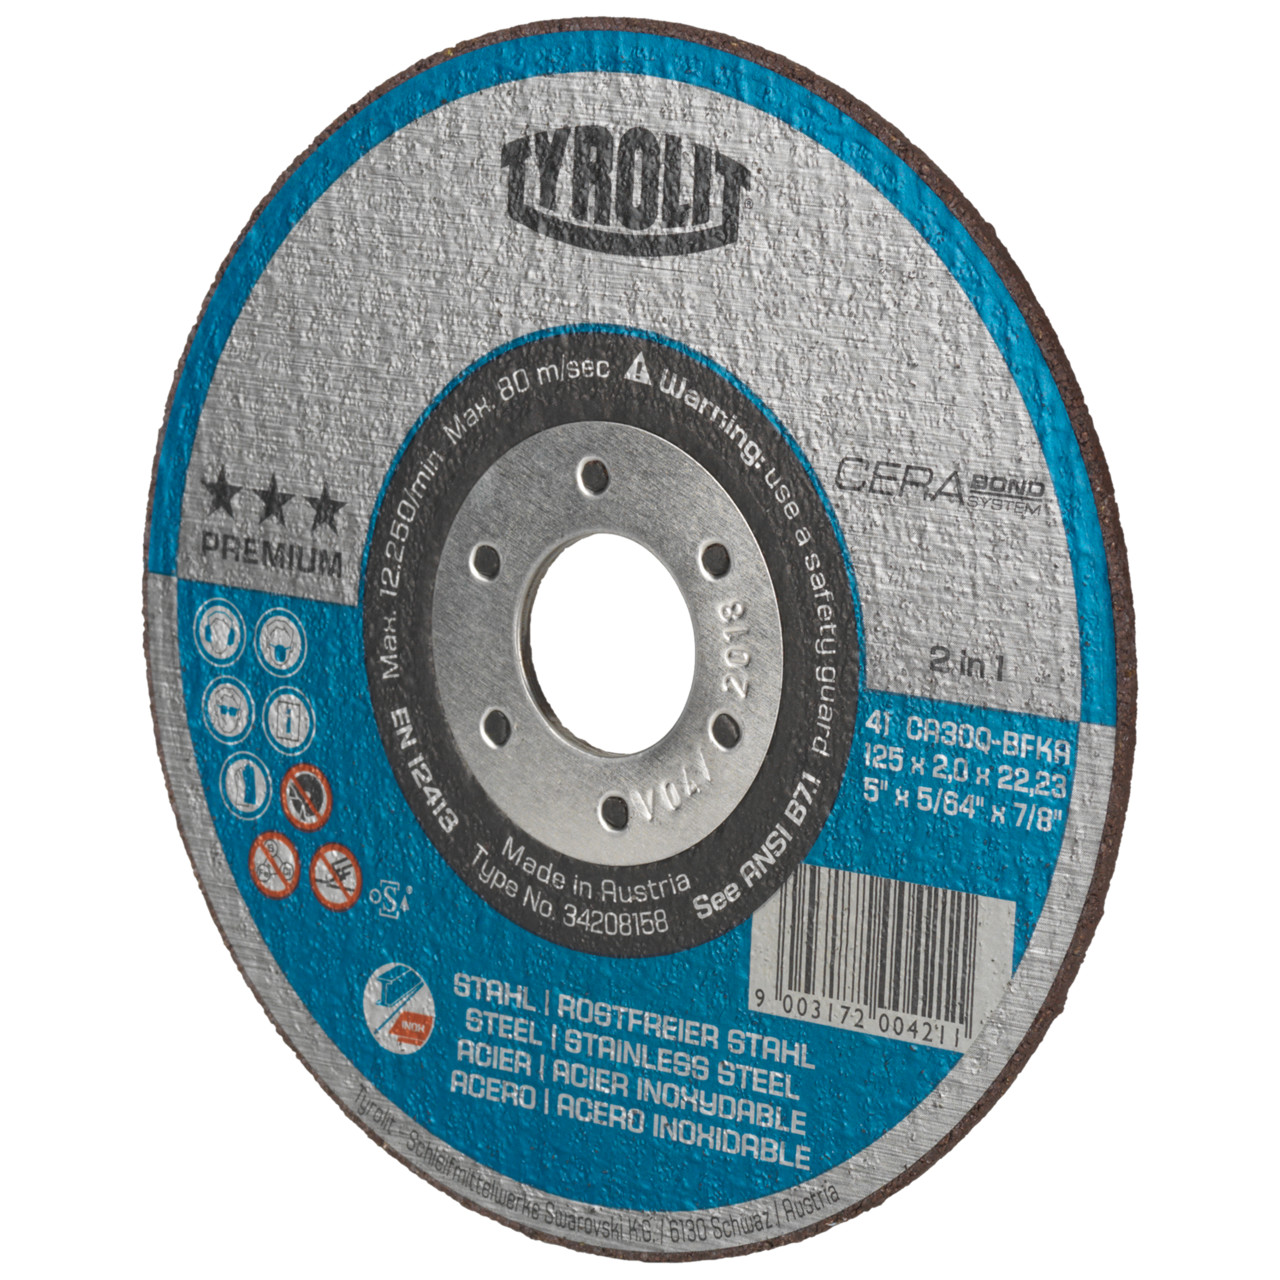 TYROLIT CERABOND Cutting disc DxDxH 125x2.0x22.23 2in1 for steel and stainless steel, shape: 41 - straight version, Art. 34256281